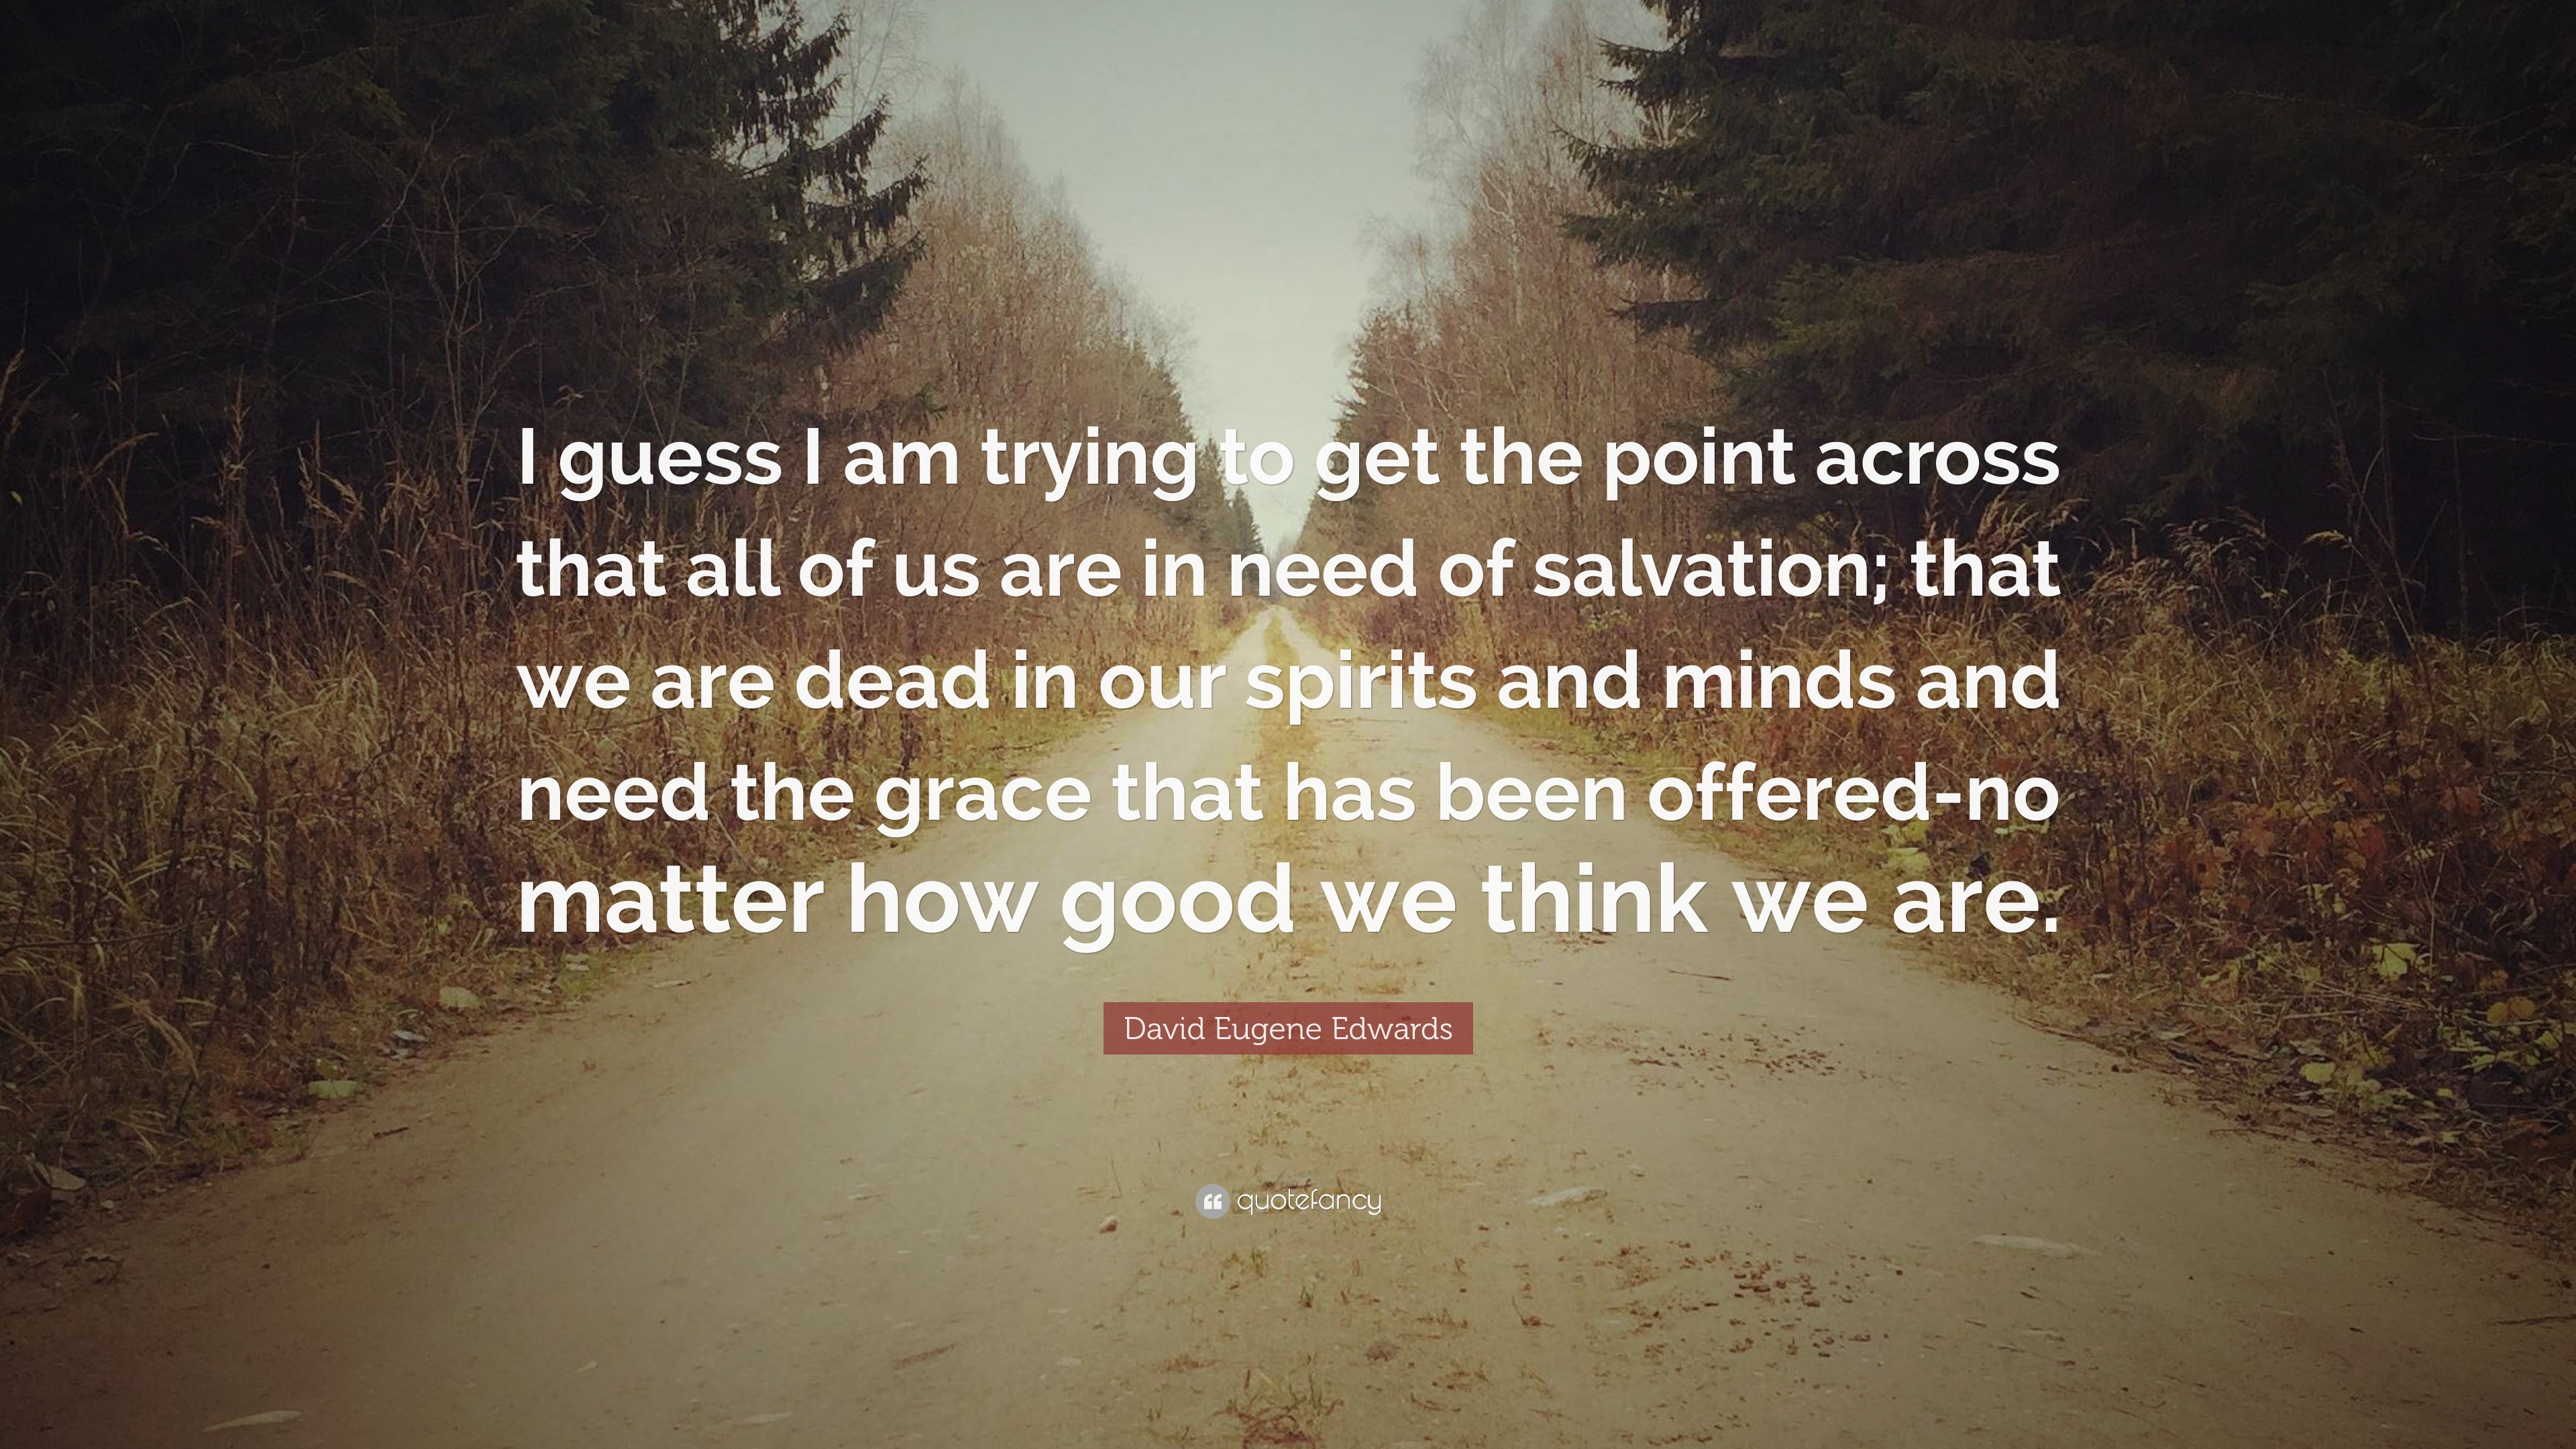 David Eugene Edwards Quote: guess I am trying to get the point across that all of us are in need of salvation; that we are dead in our spirits and...”